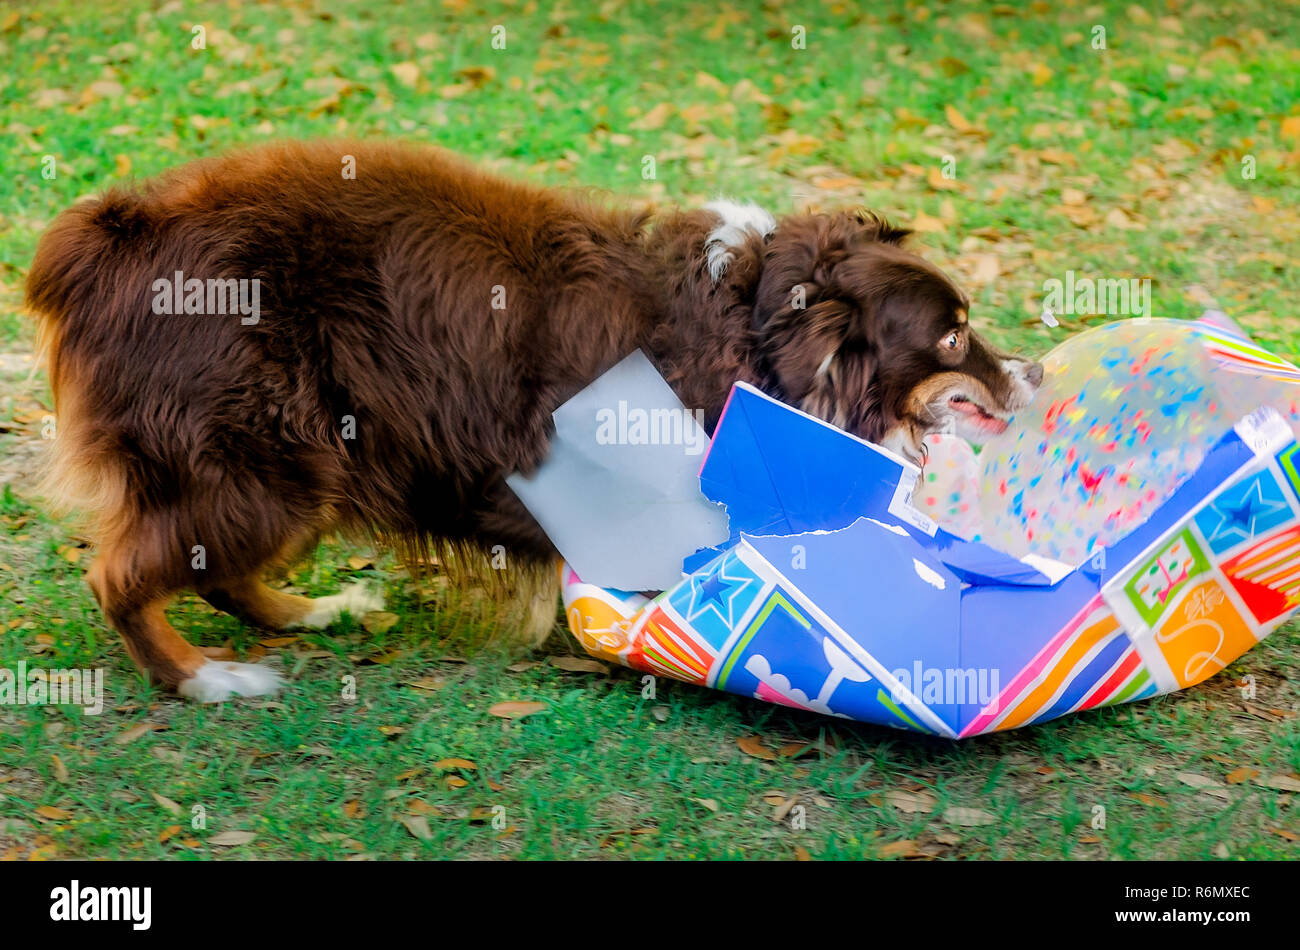 Cowboy, an eight-year-old red tri Australian Shepherd, expresses surprise as he opens a bag containing a ball at his birthday party, April 4, 2016. Stock Photo